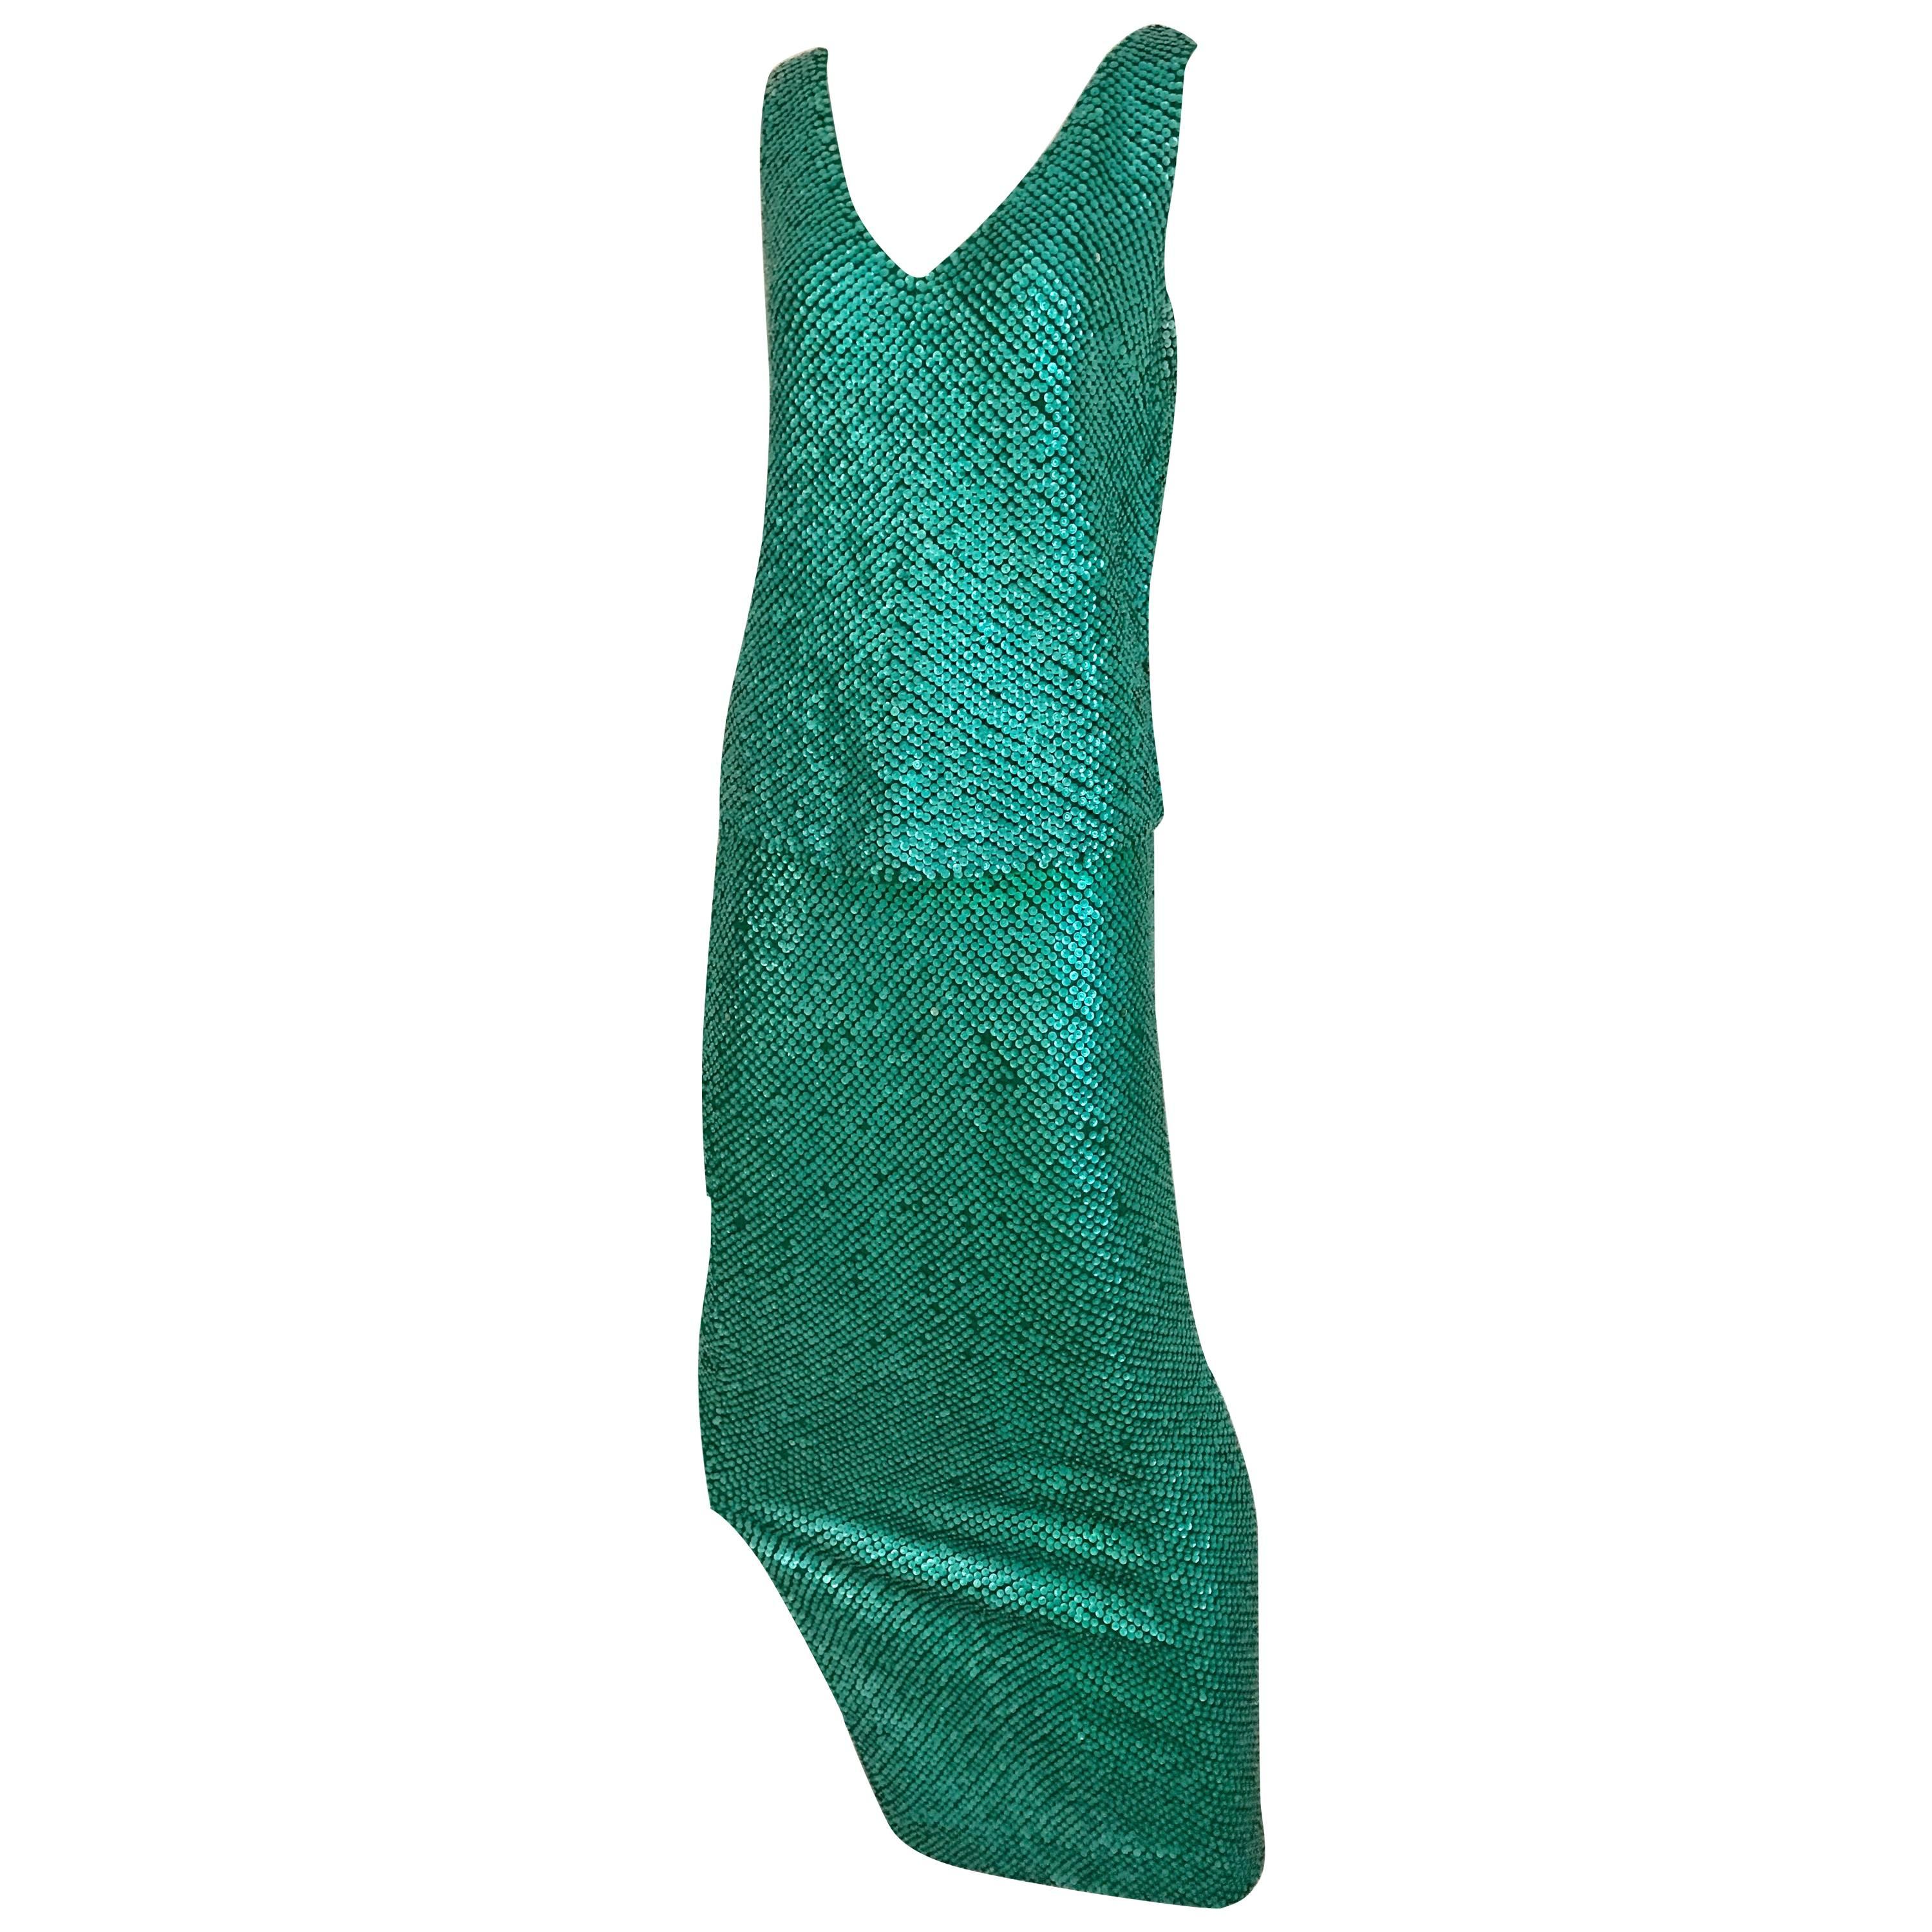 1960s Gene Shelly Emerald Green Sequin Wool Knit Sleeveless Top and Maxi Skirt 